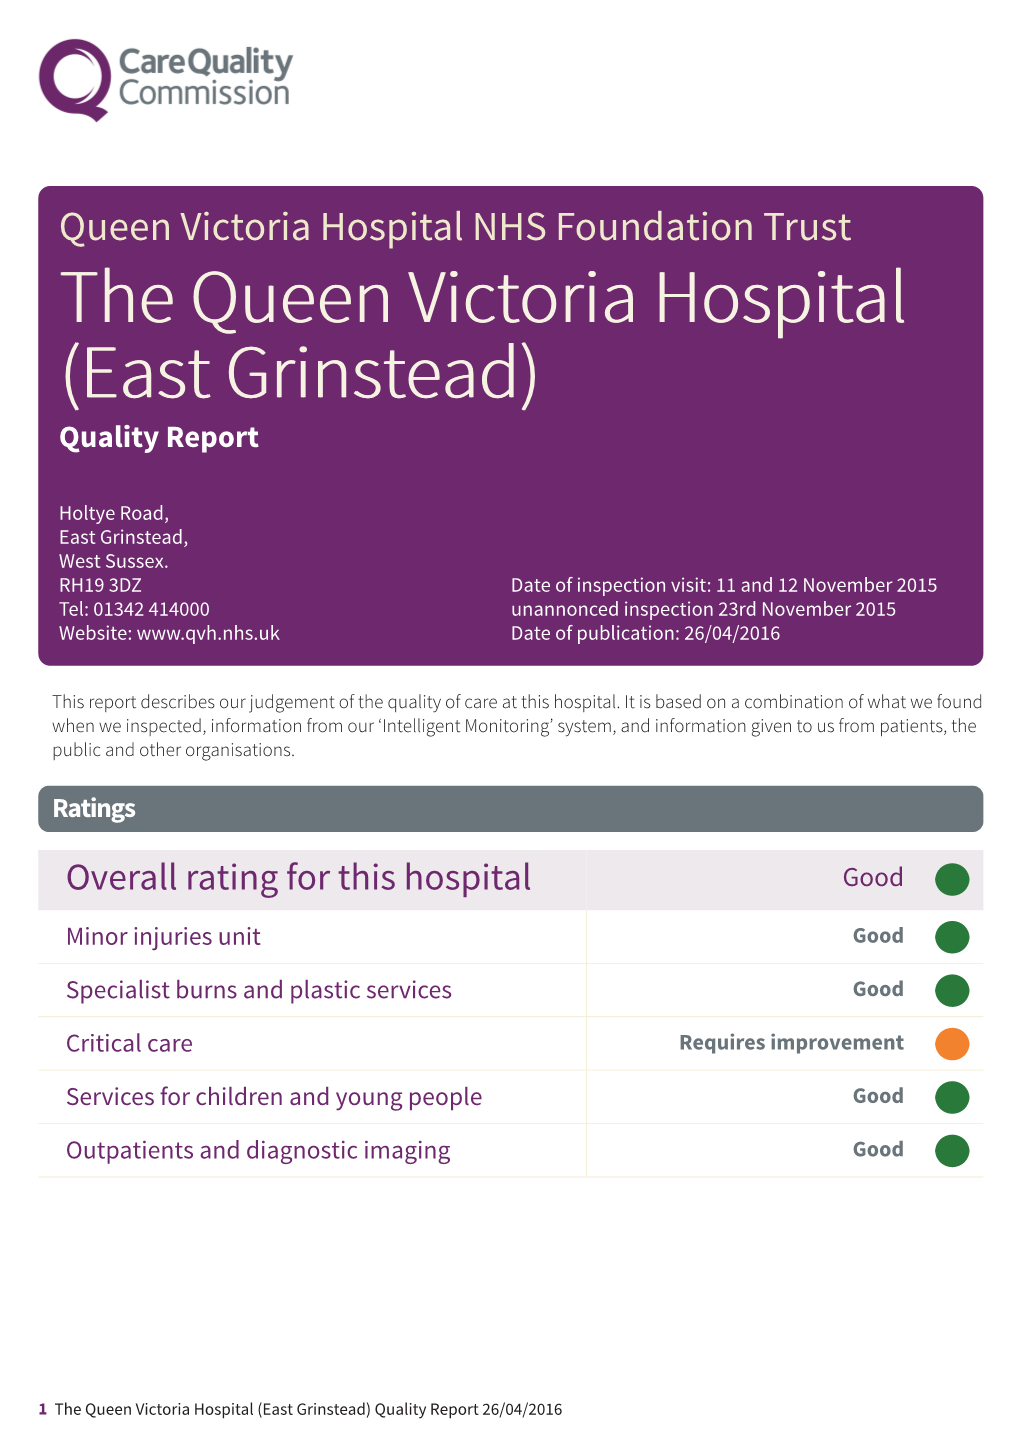 The Queen Victoria Hospital (East Grinstead) Quality Report